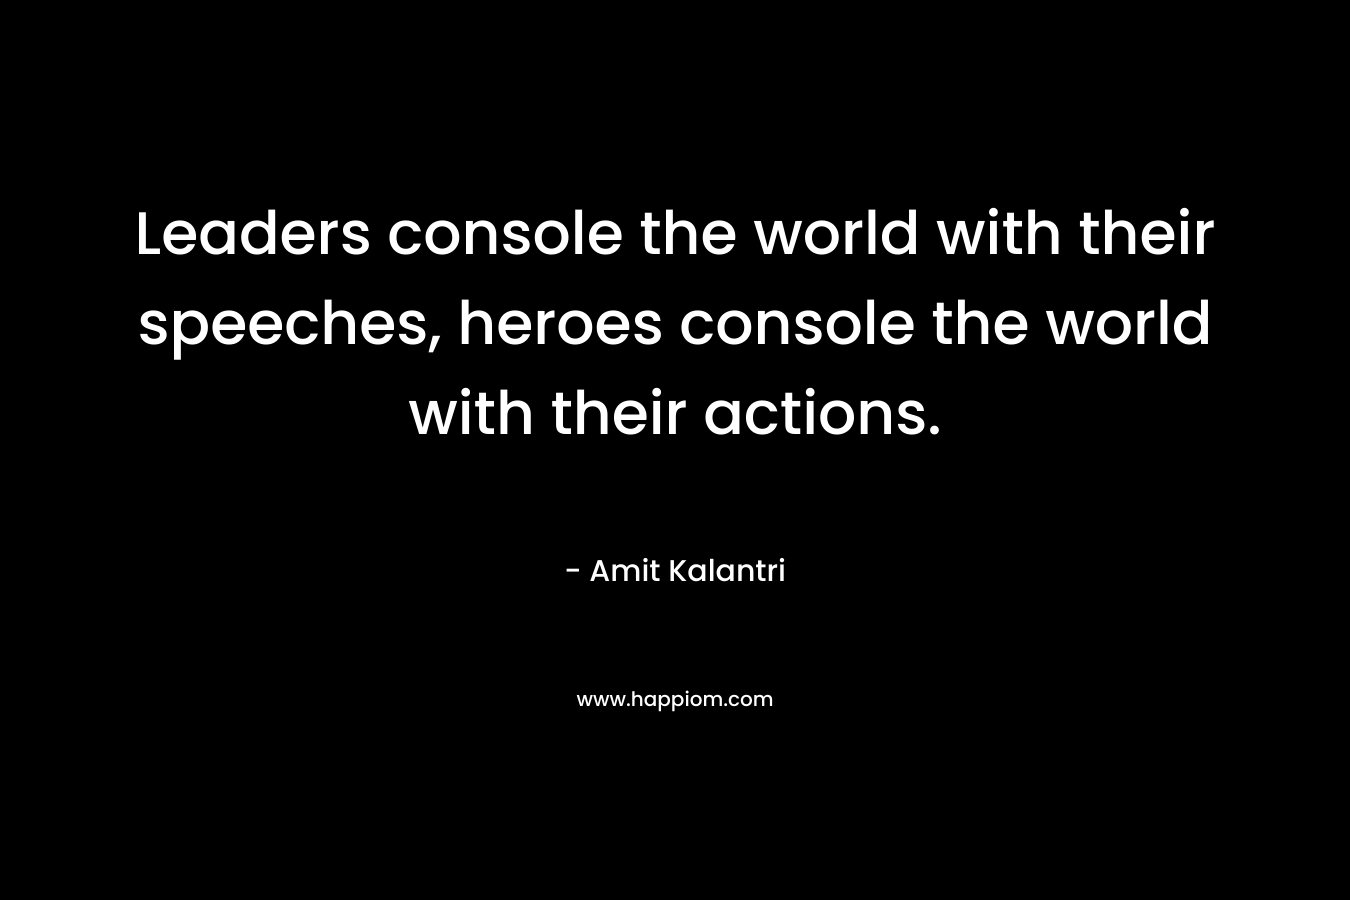 Leaders console the world with their speeches, heroes console the world with their actions. – Amit Kalantri